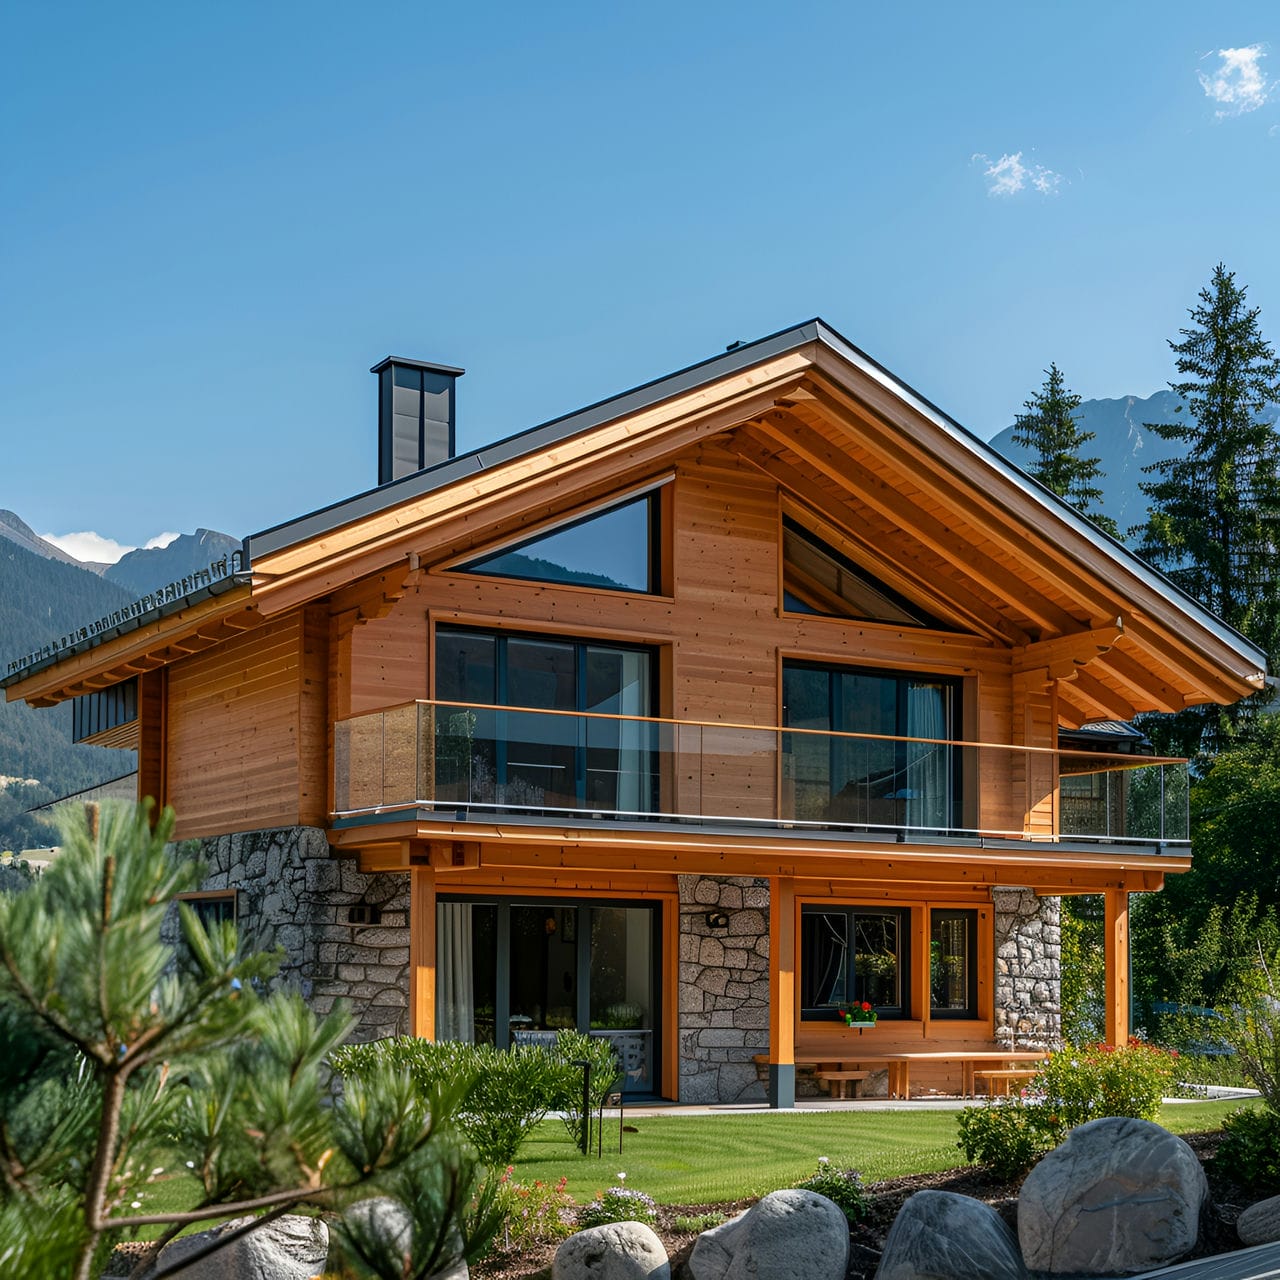 Chalet: architecture, history, sustainability, materials, and typical prices